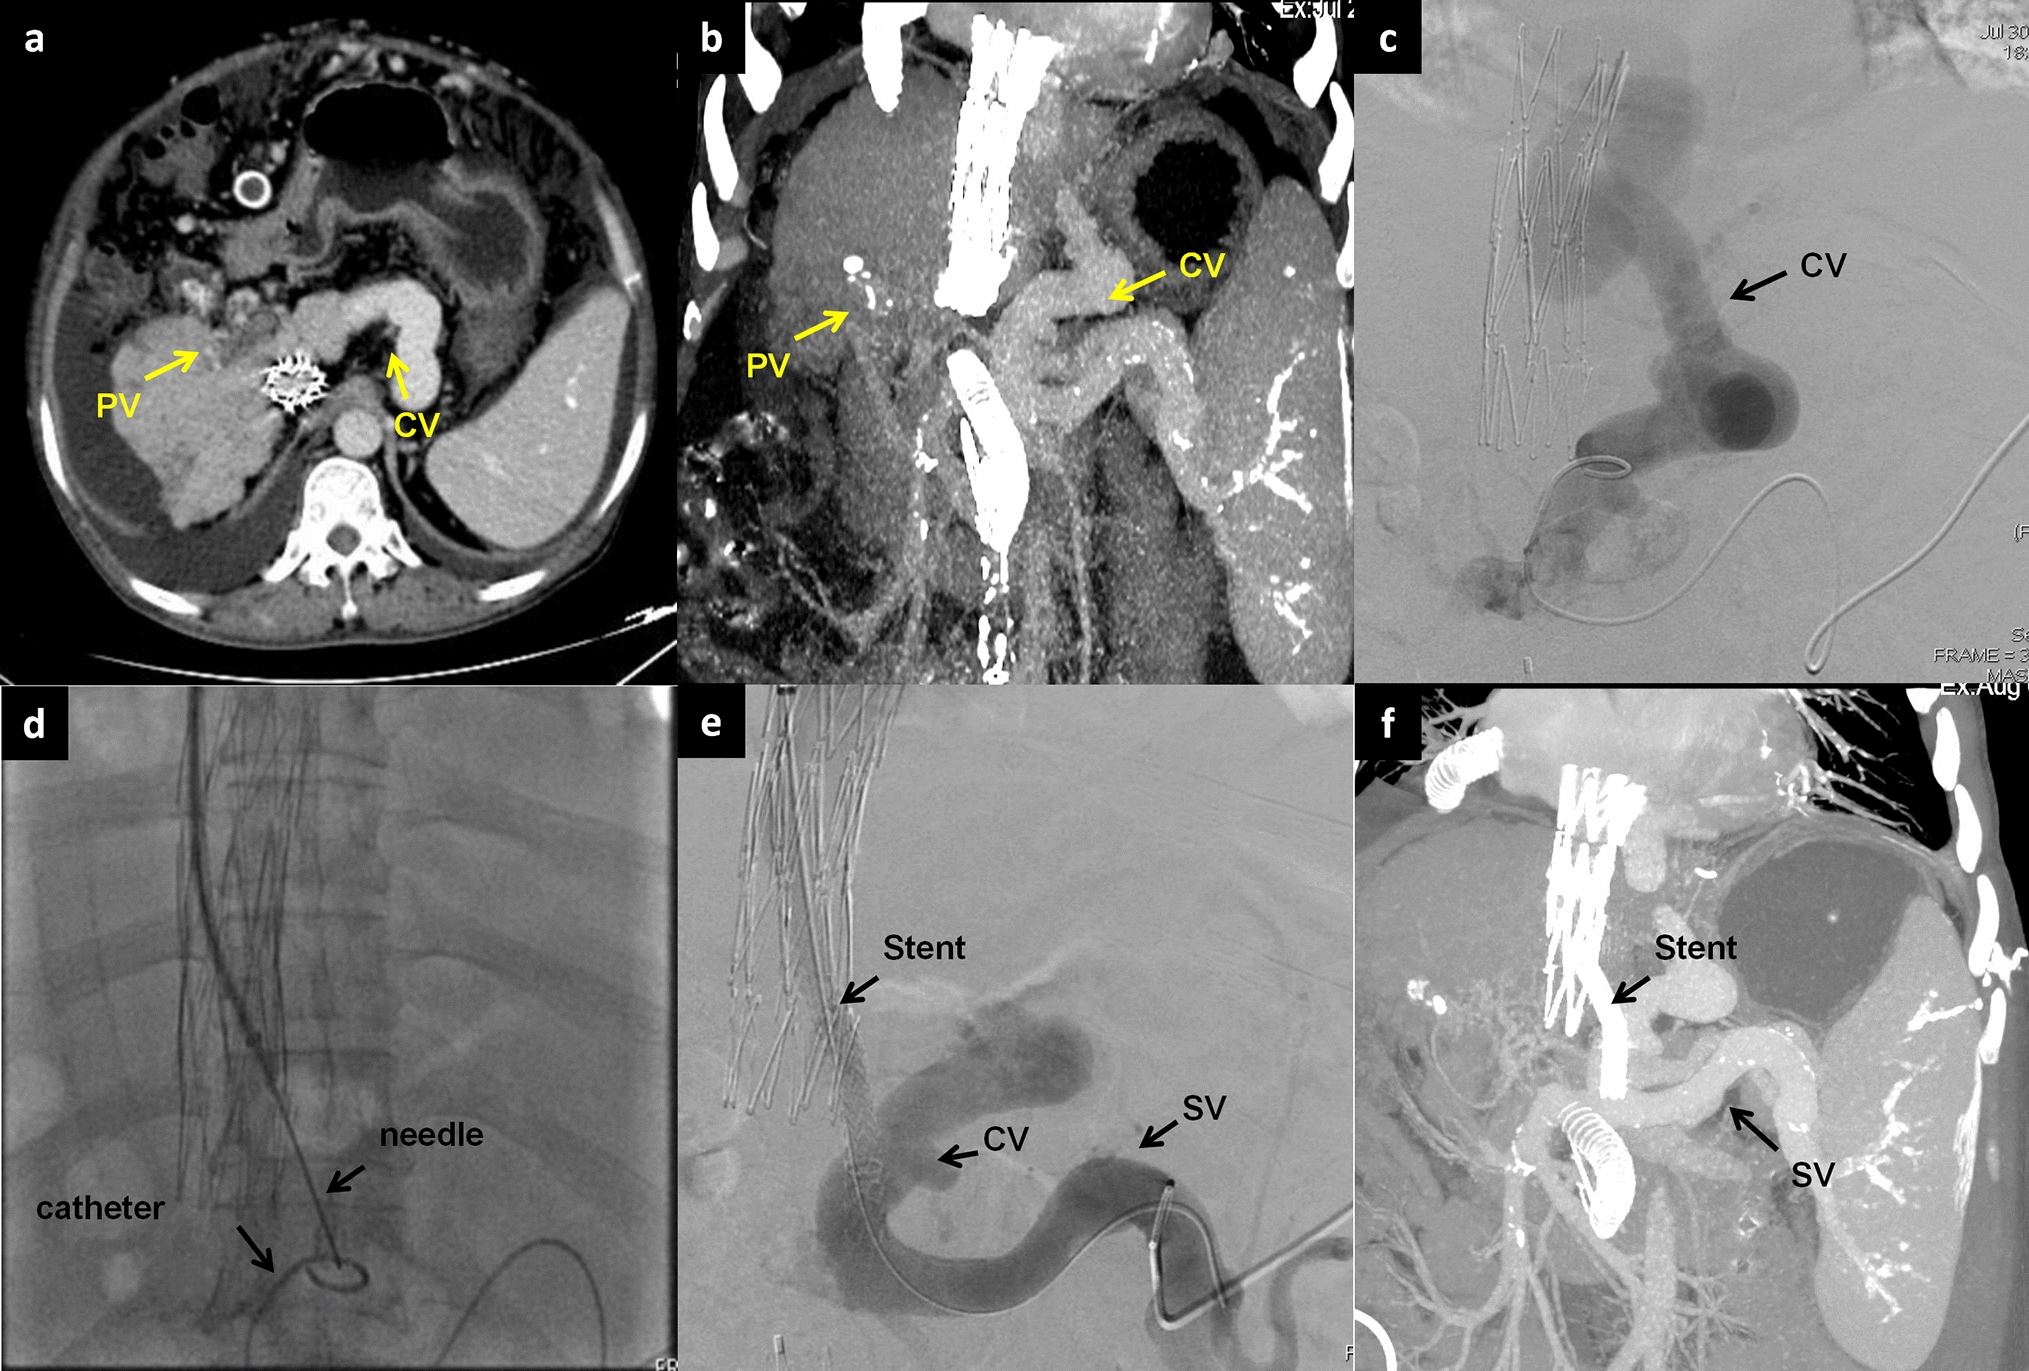 Efficacy and safety of precision-guided transjugular extrahepatic portosystemic shunt (TEPS) in the management of cavernous transformation of the portal vein with portal hypertension: a case series